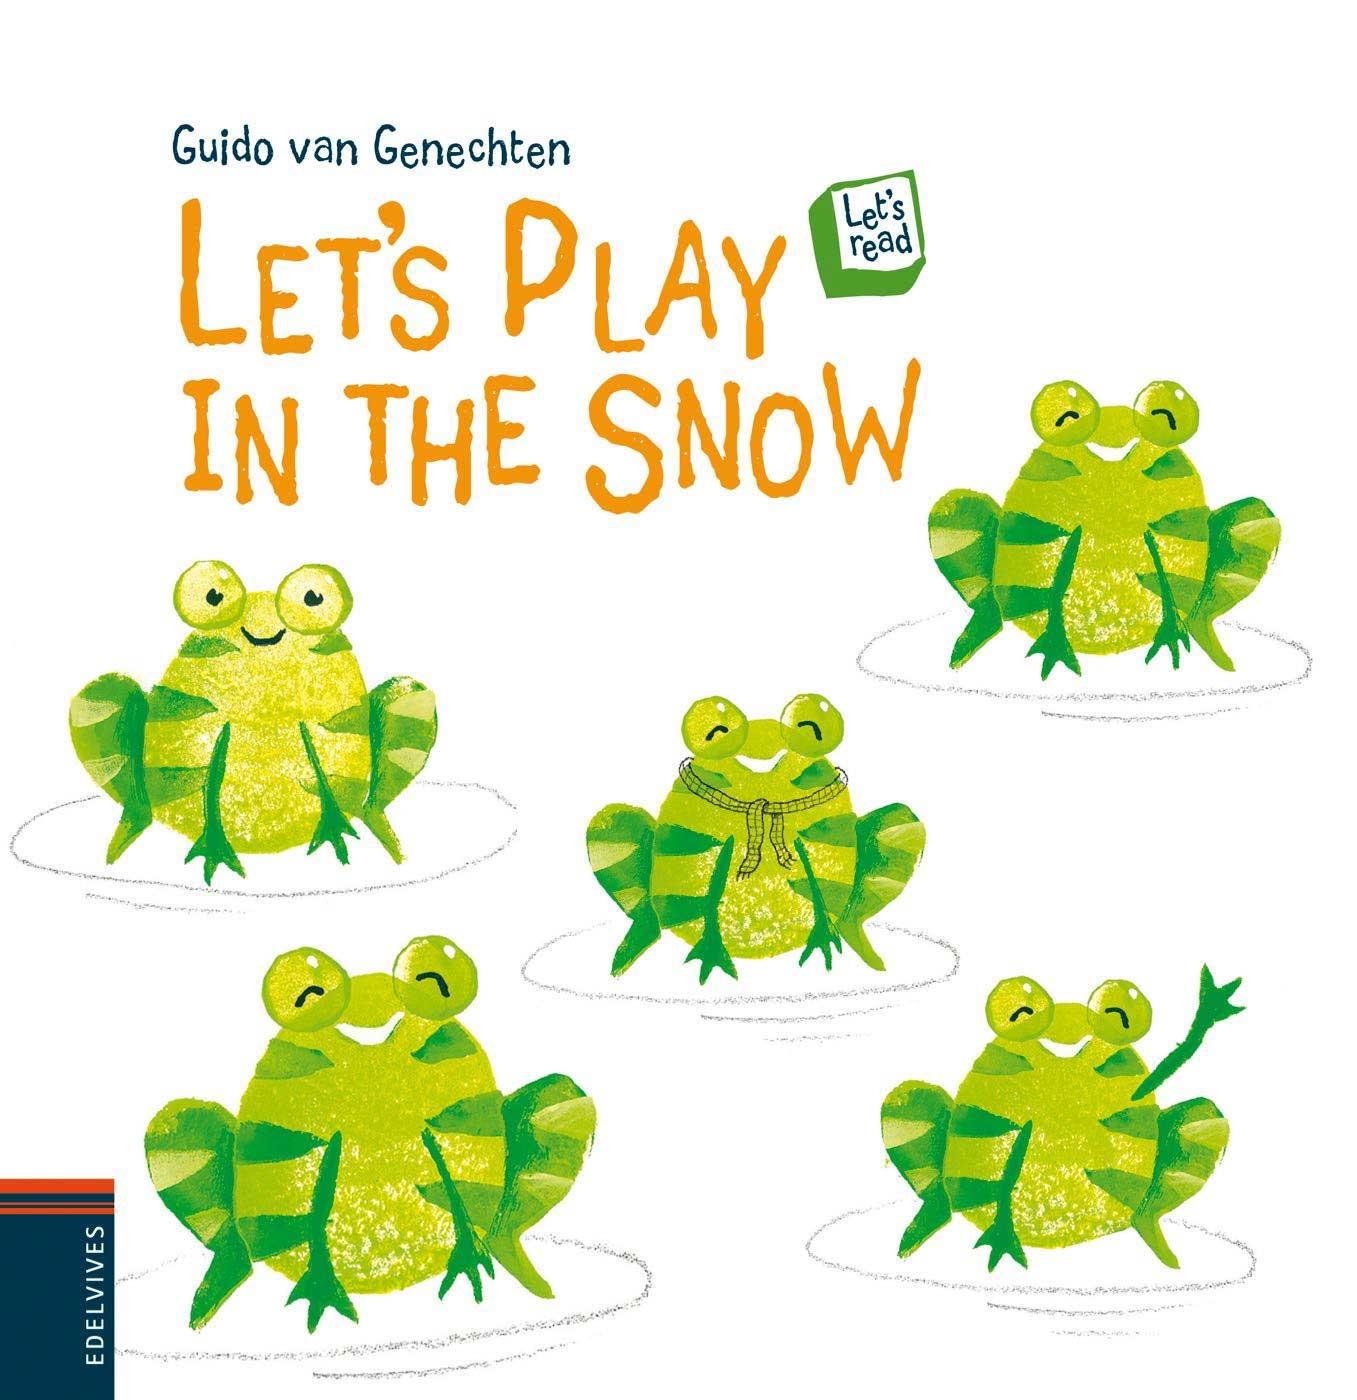 Let's play in the snow "Let's read"